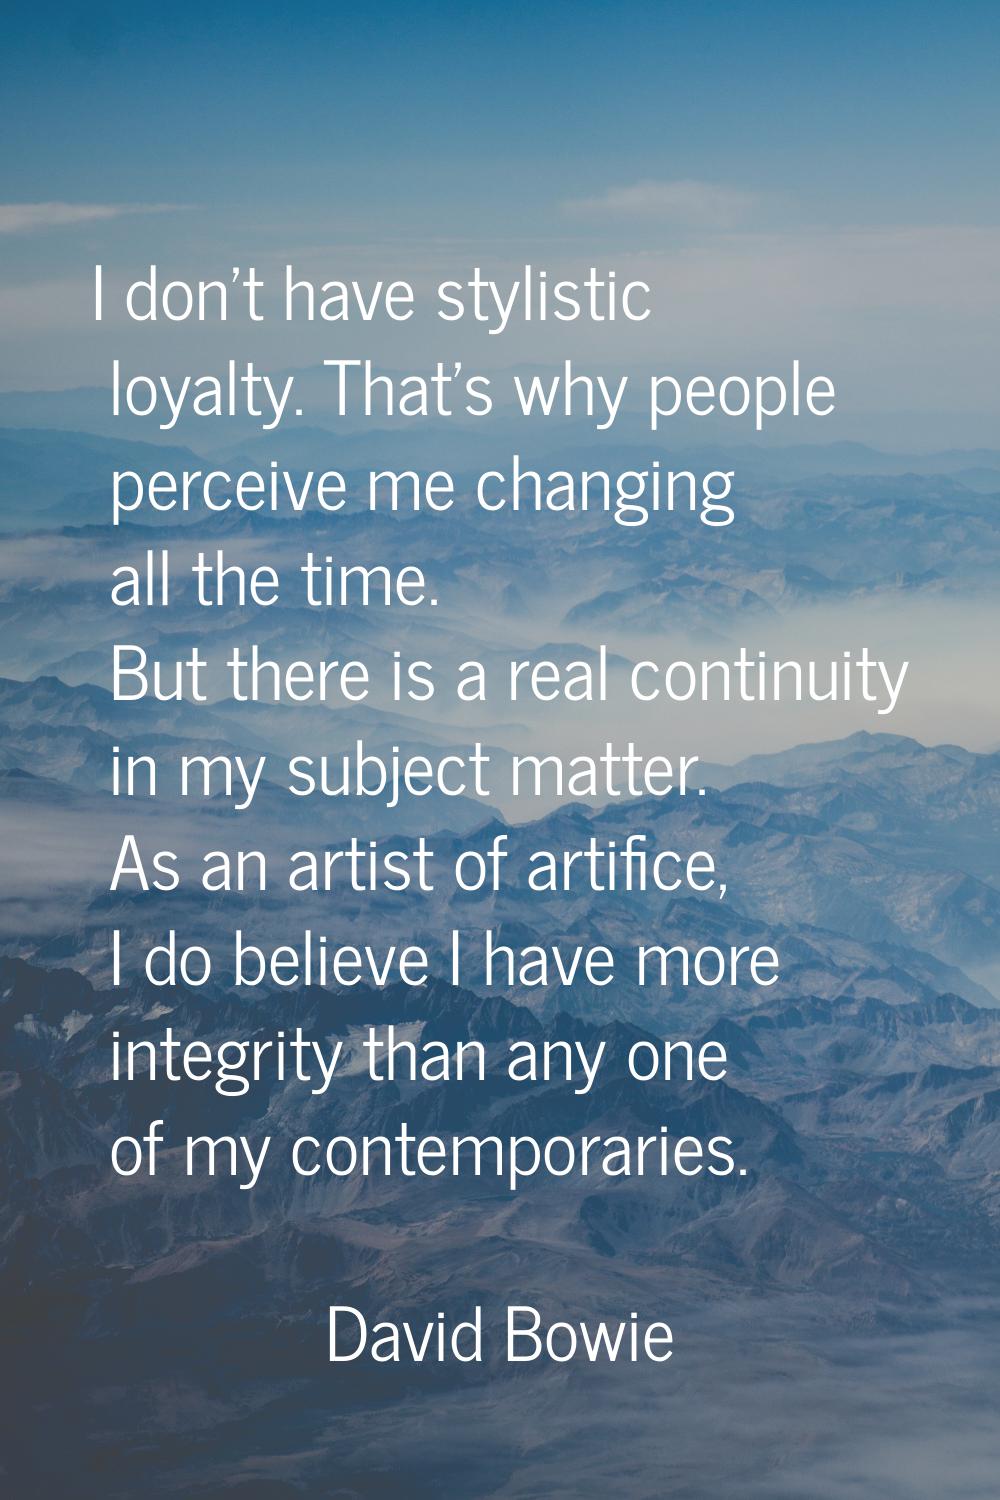 I don't have stylistic loyalty. That's why people perceive me changing all the time. But there is a